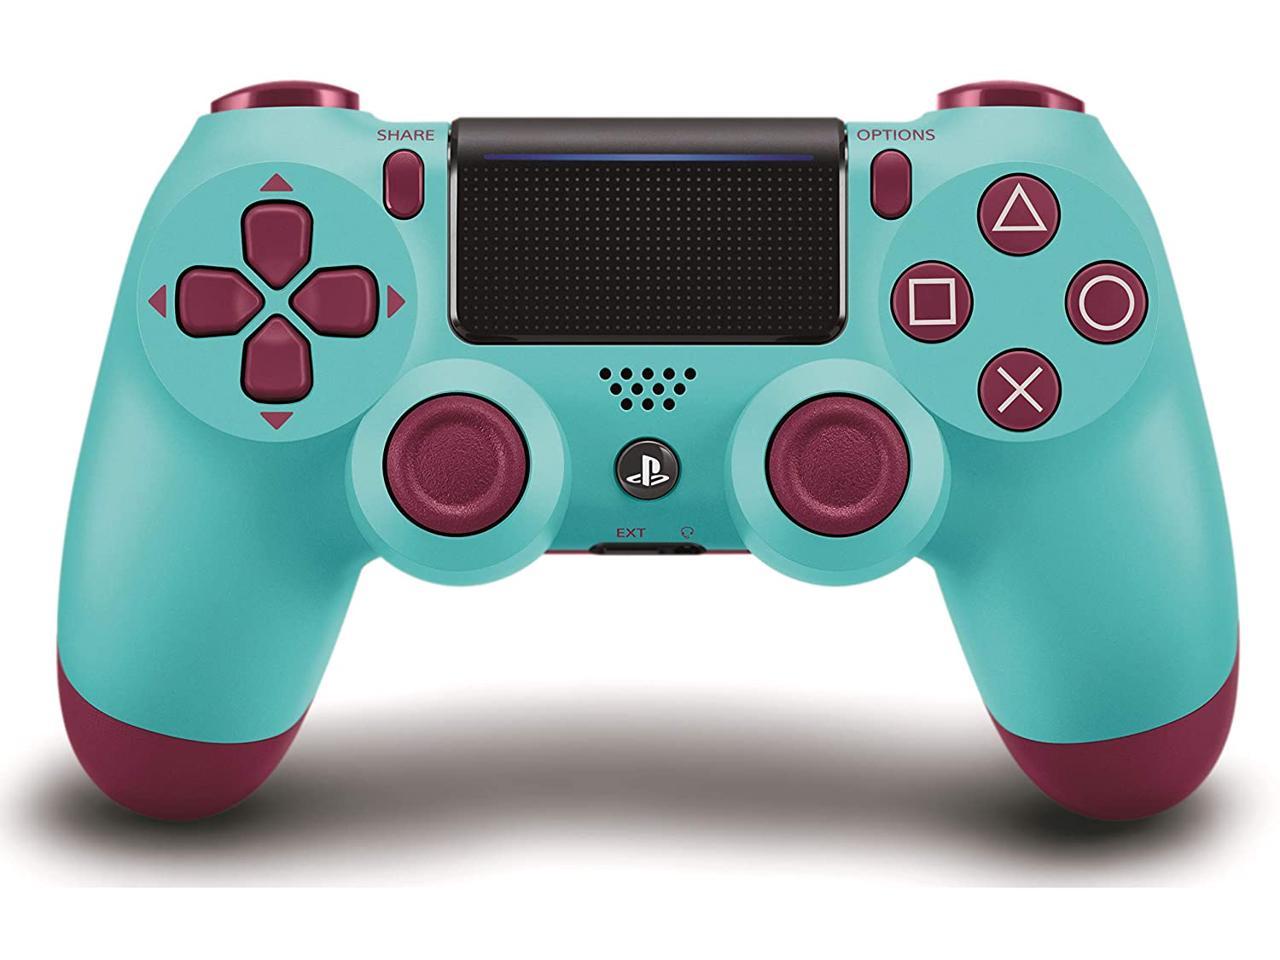 PS4 Wireless Controller Game Pad for SONY PlayStation 4 Dualshock - Berry Blue,Hot PS4 Wireless Controller Game Pad for SONY PlayStation Dualshock 4 Camouflage